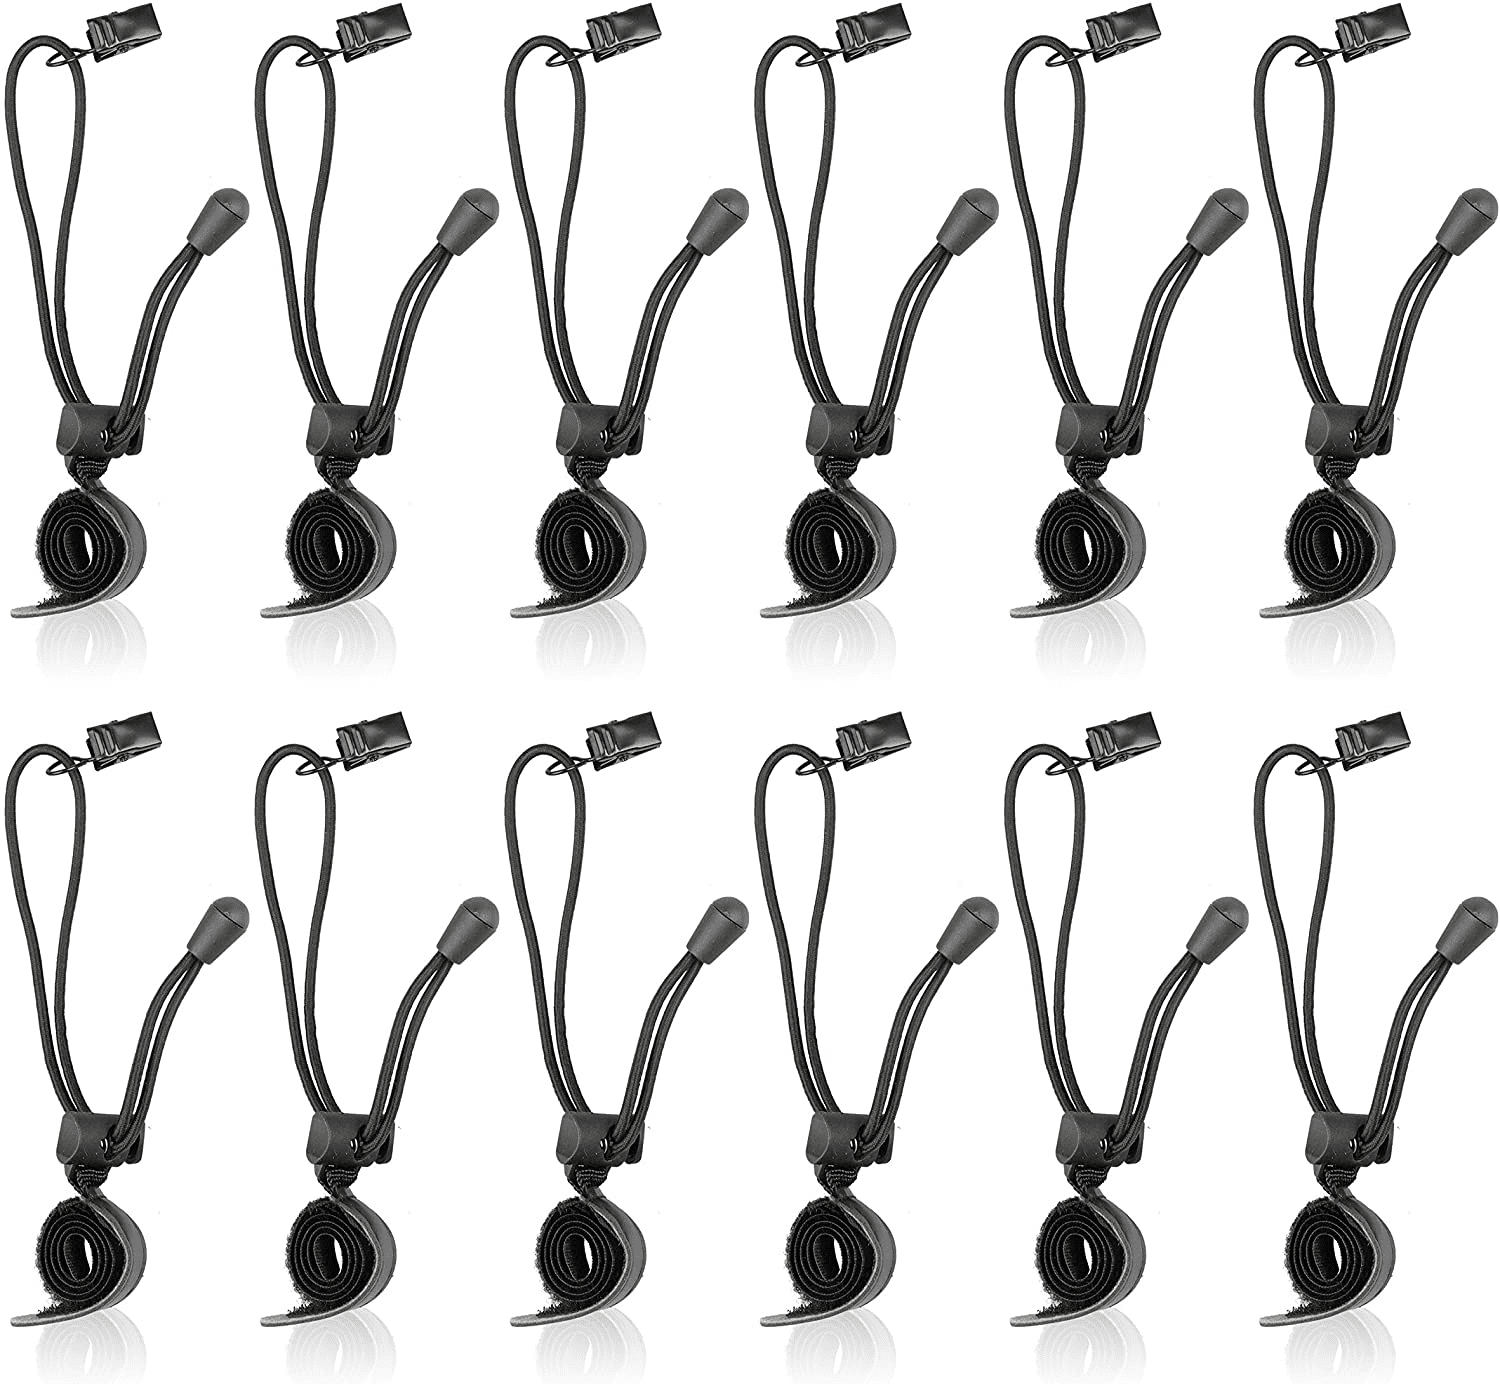 Black SLOW DOLPHIN Backdrop Background Muslin String Clips Holder Multifunctional for Photo Video Photography Studio 12 Pack